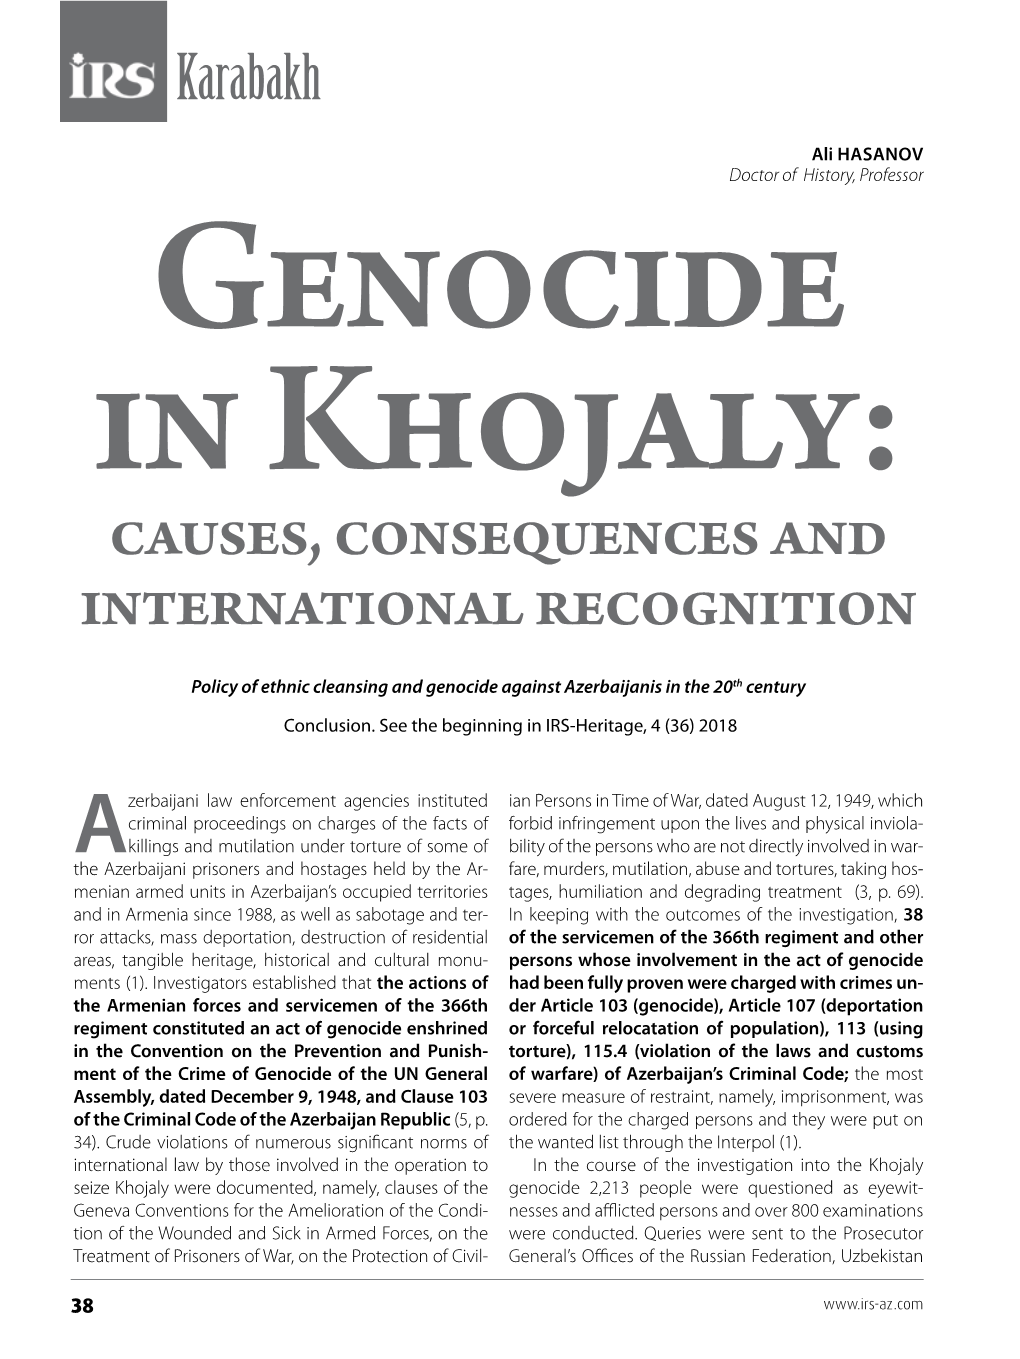 Genocide in Khojaly: Causes, Consequences and International Recognition